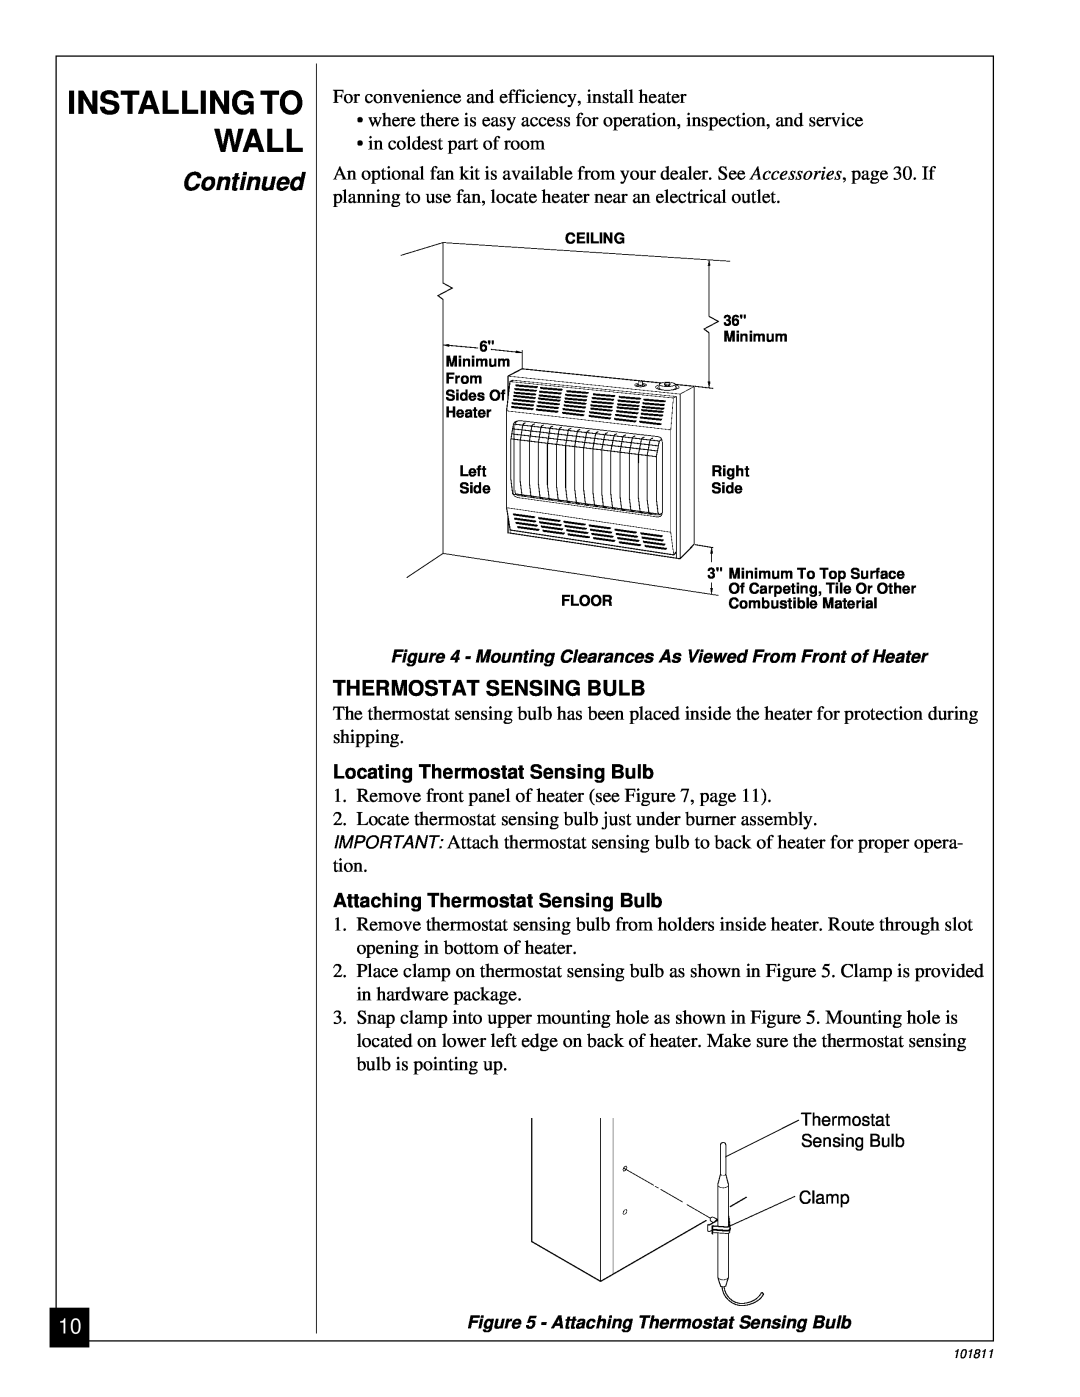 Desa 101811-01C.pdf installation manual Continued, Installing To Wall, Thermostat Sensing Bulb 